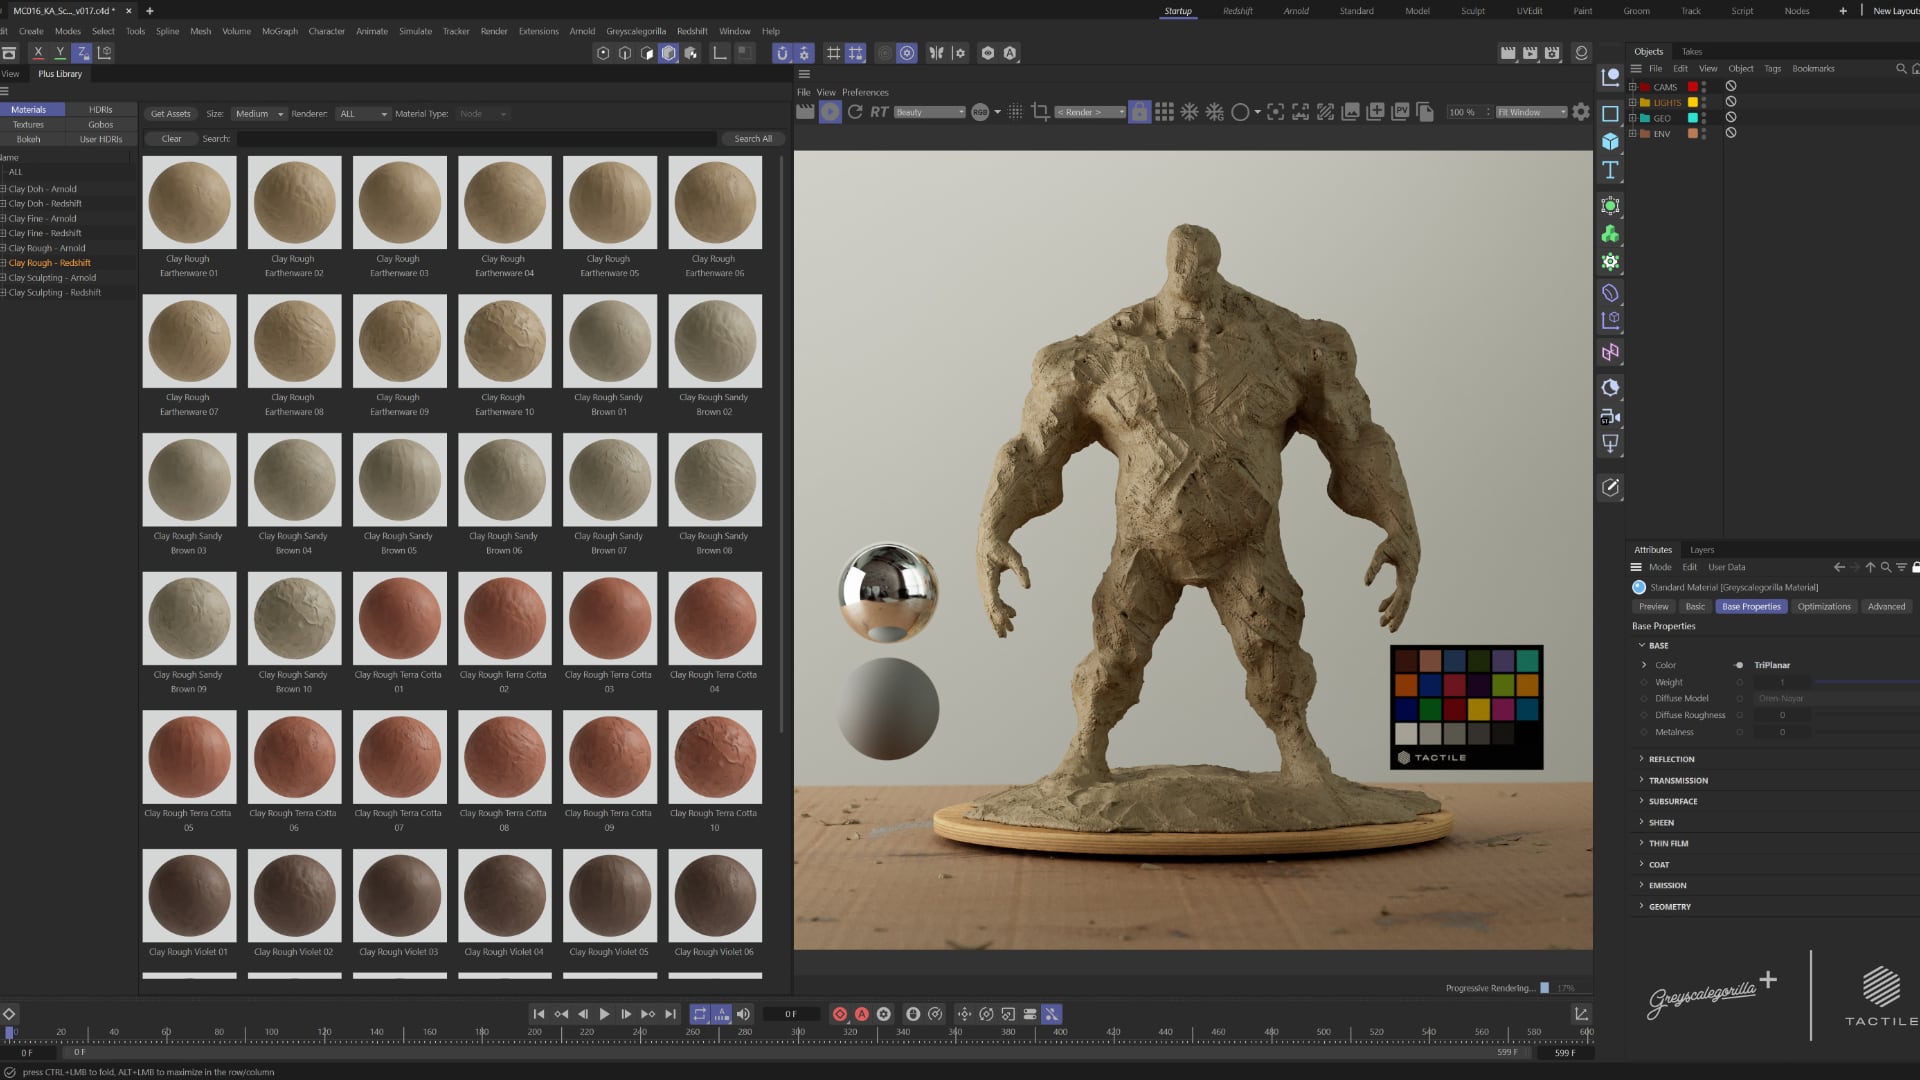 Clay Rough is one of the new texture libraries in Greyscalegorilla's Tactile